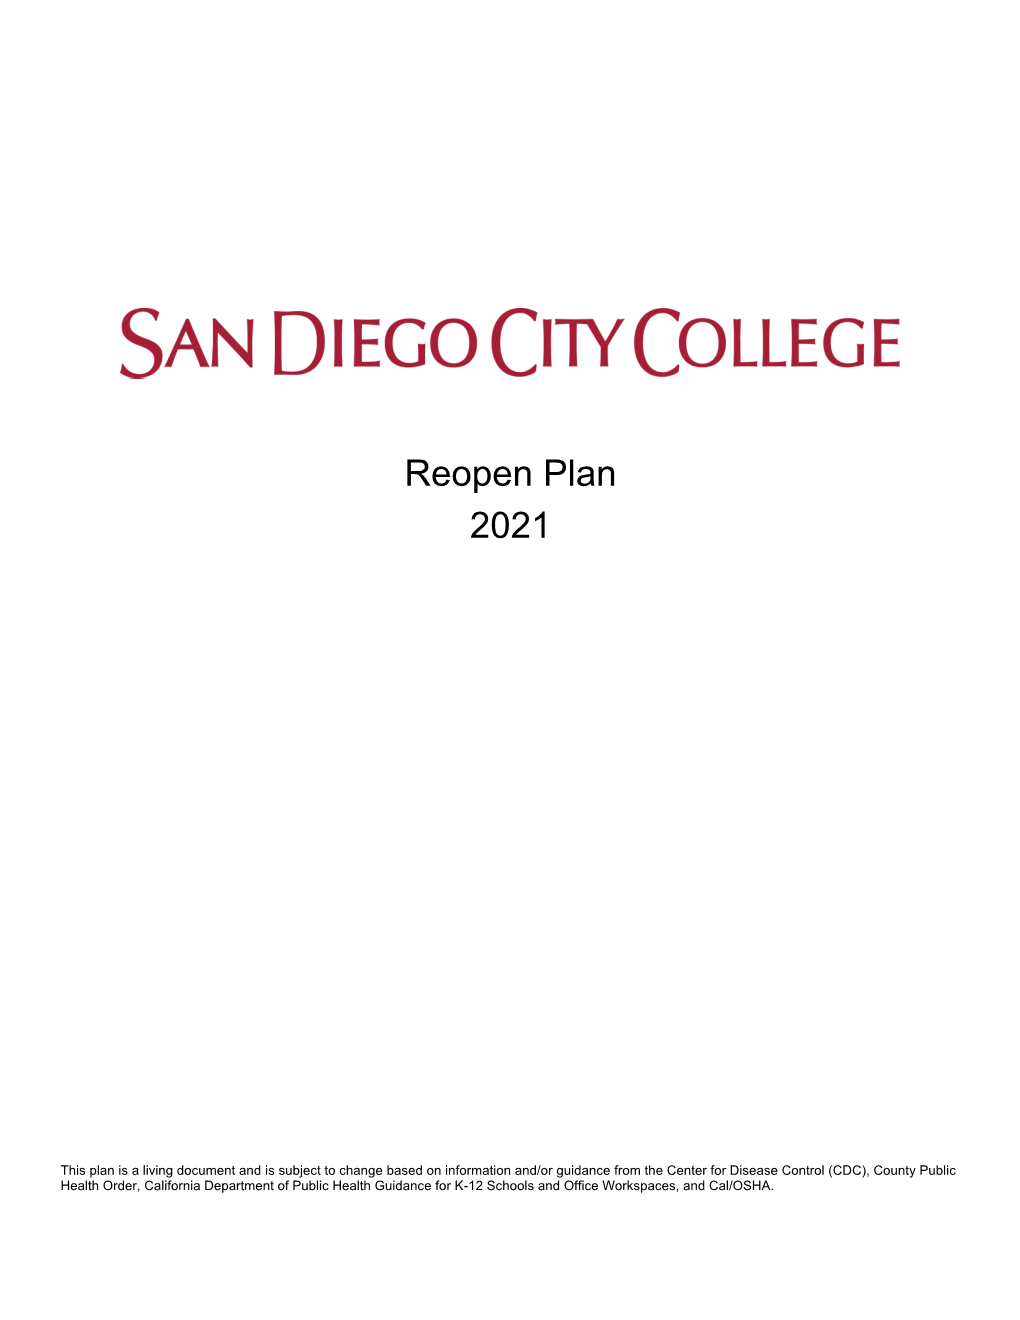 City College Reopen Plan 2021